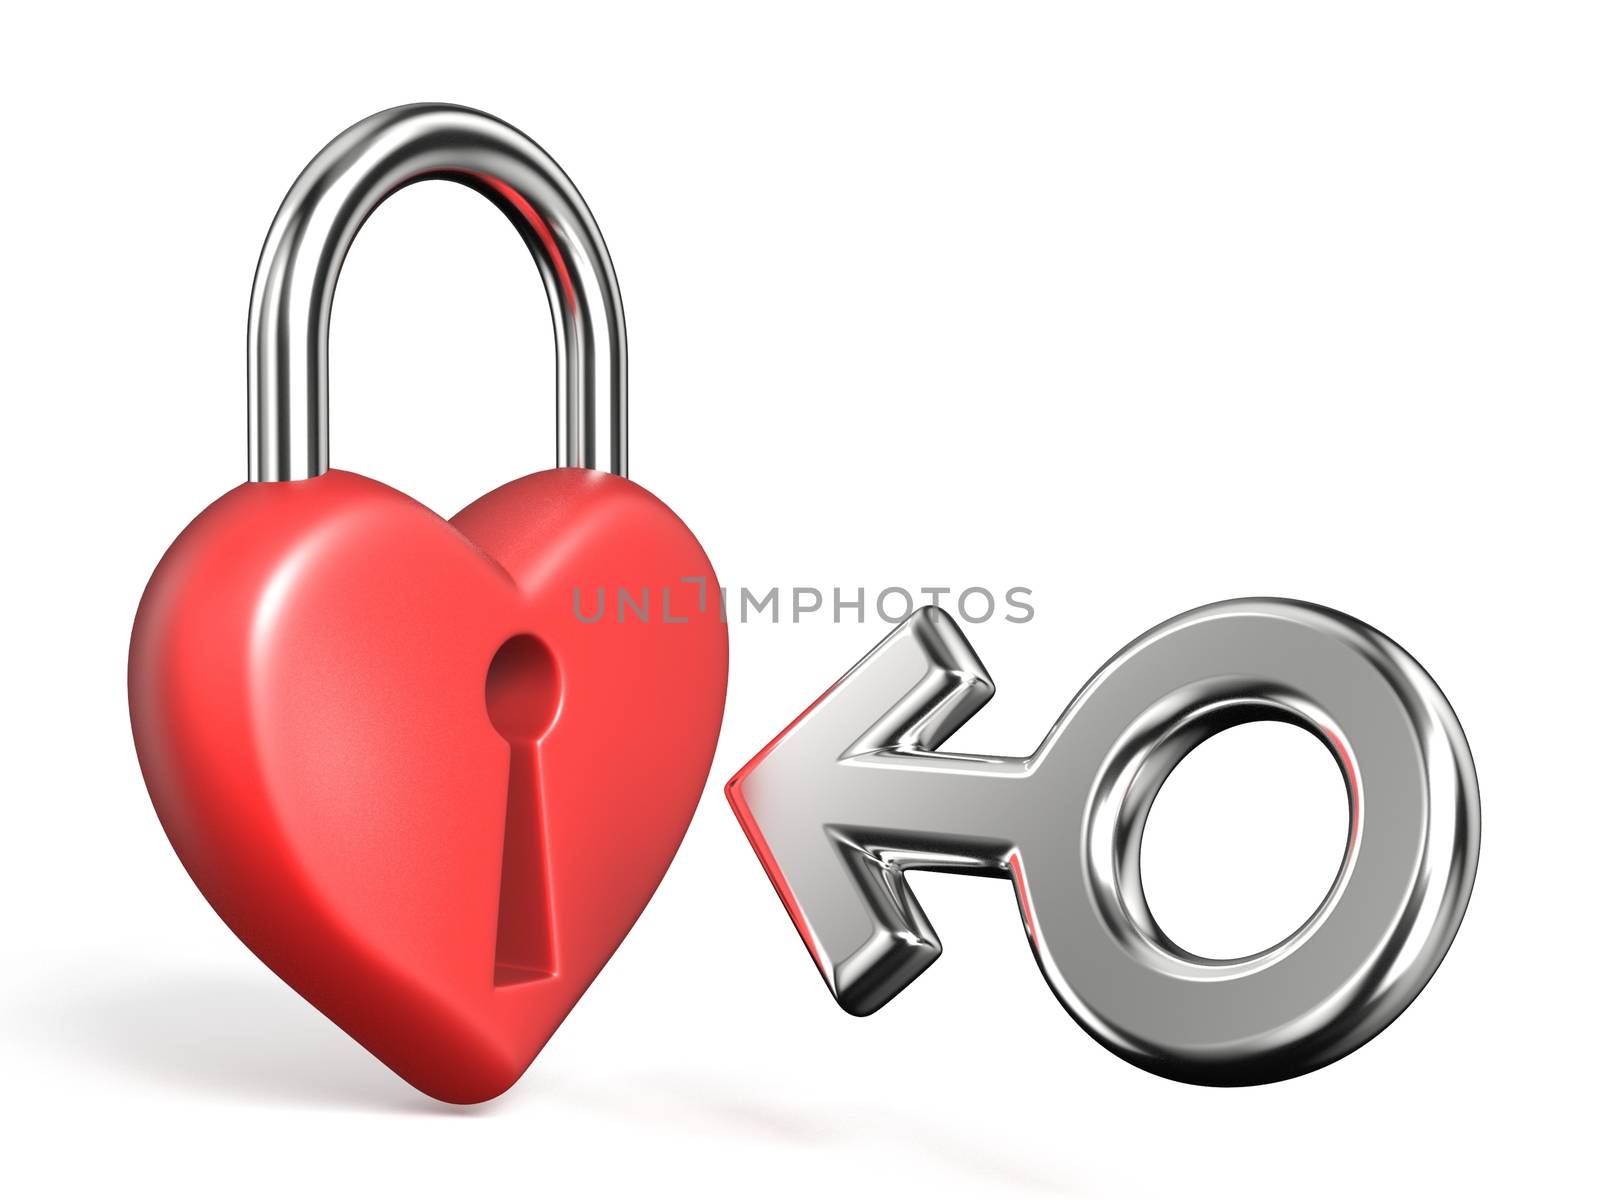 Heart shaped padlock and male sign 3D rendering illustration isolated on white background